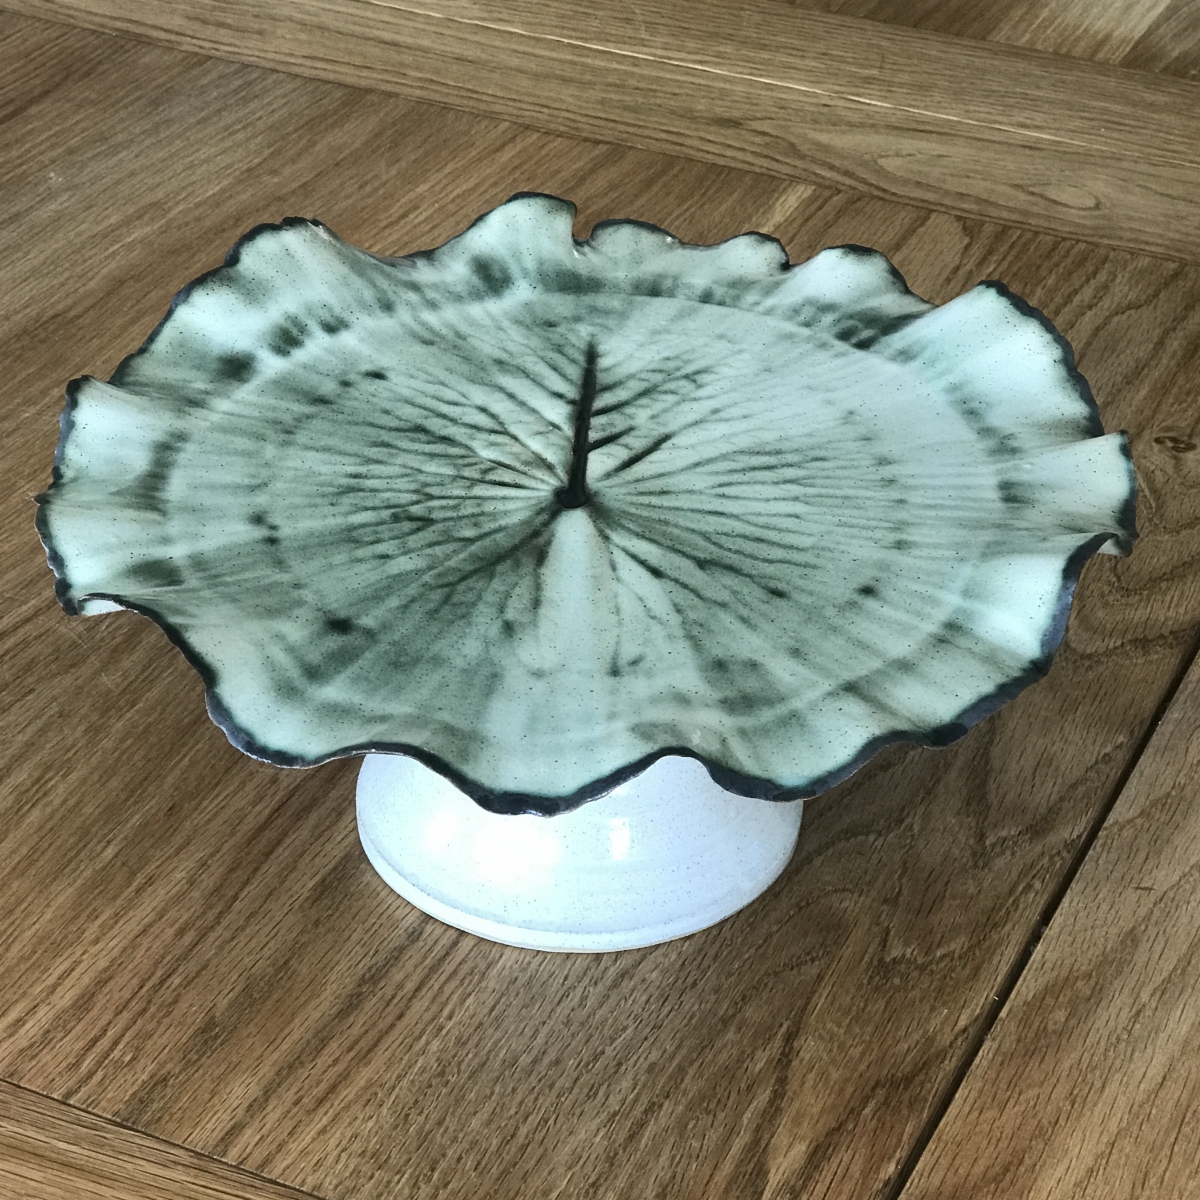 Pond Lily Leaf Cake Stand (without cake) by Sonya Ceramic Art